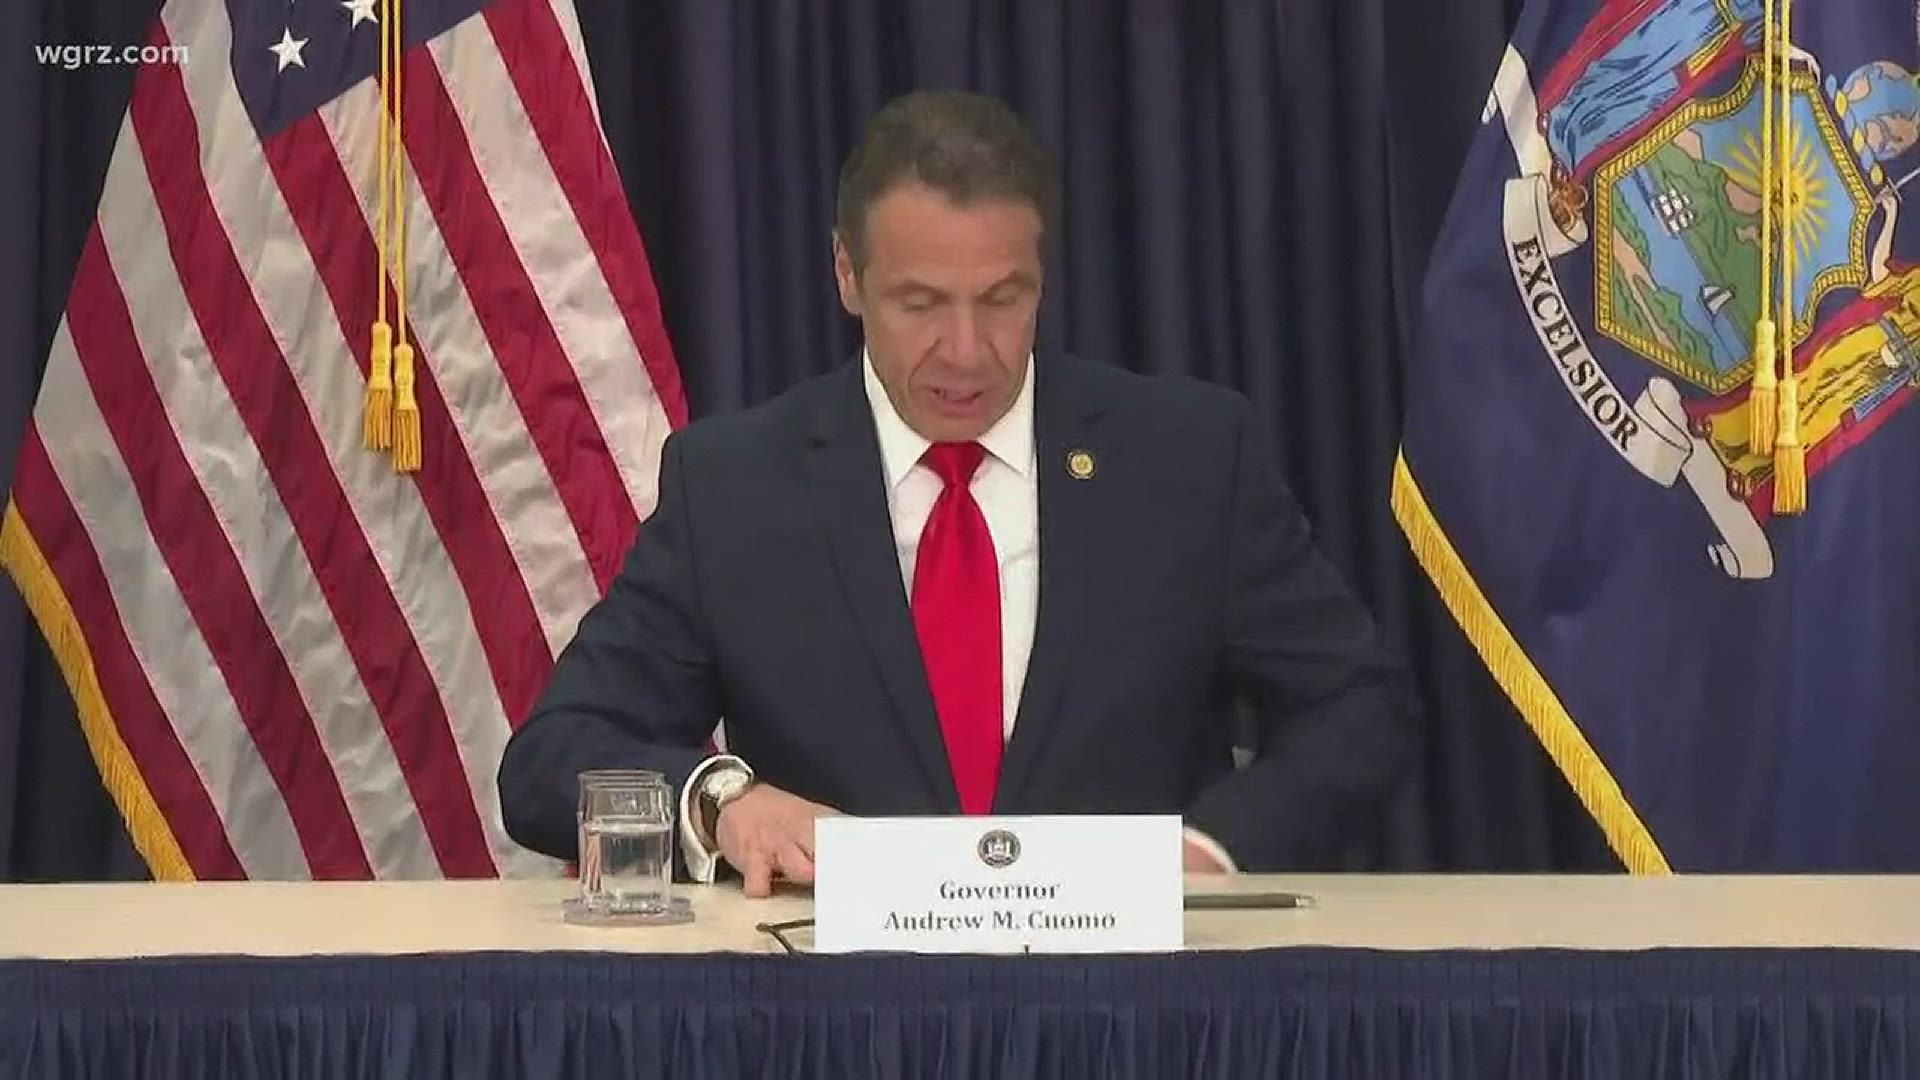 Gov. Cuomo gives an update on latest coronavirus efforts in NYS, including education, nursing homes and wearing masks.